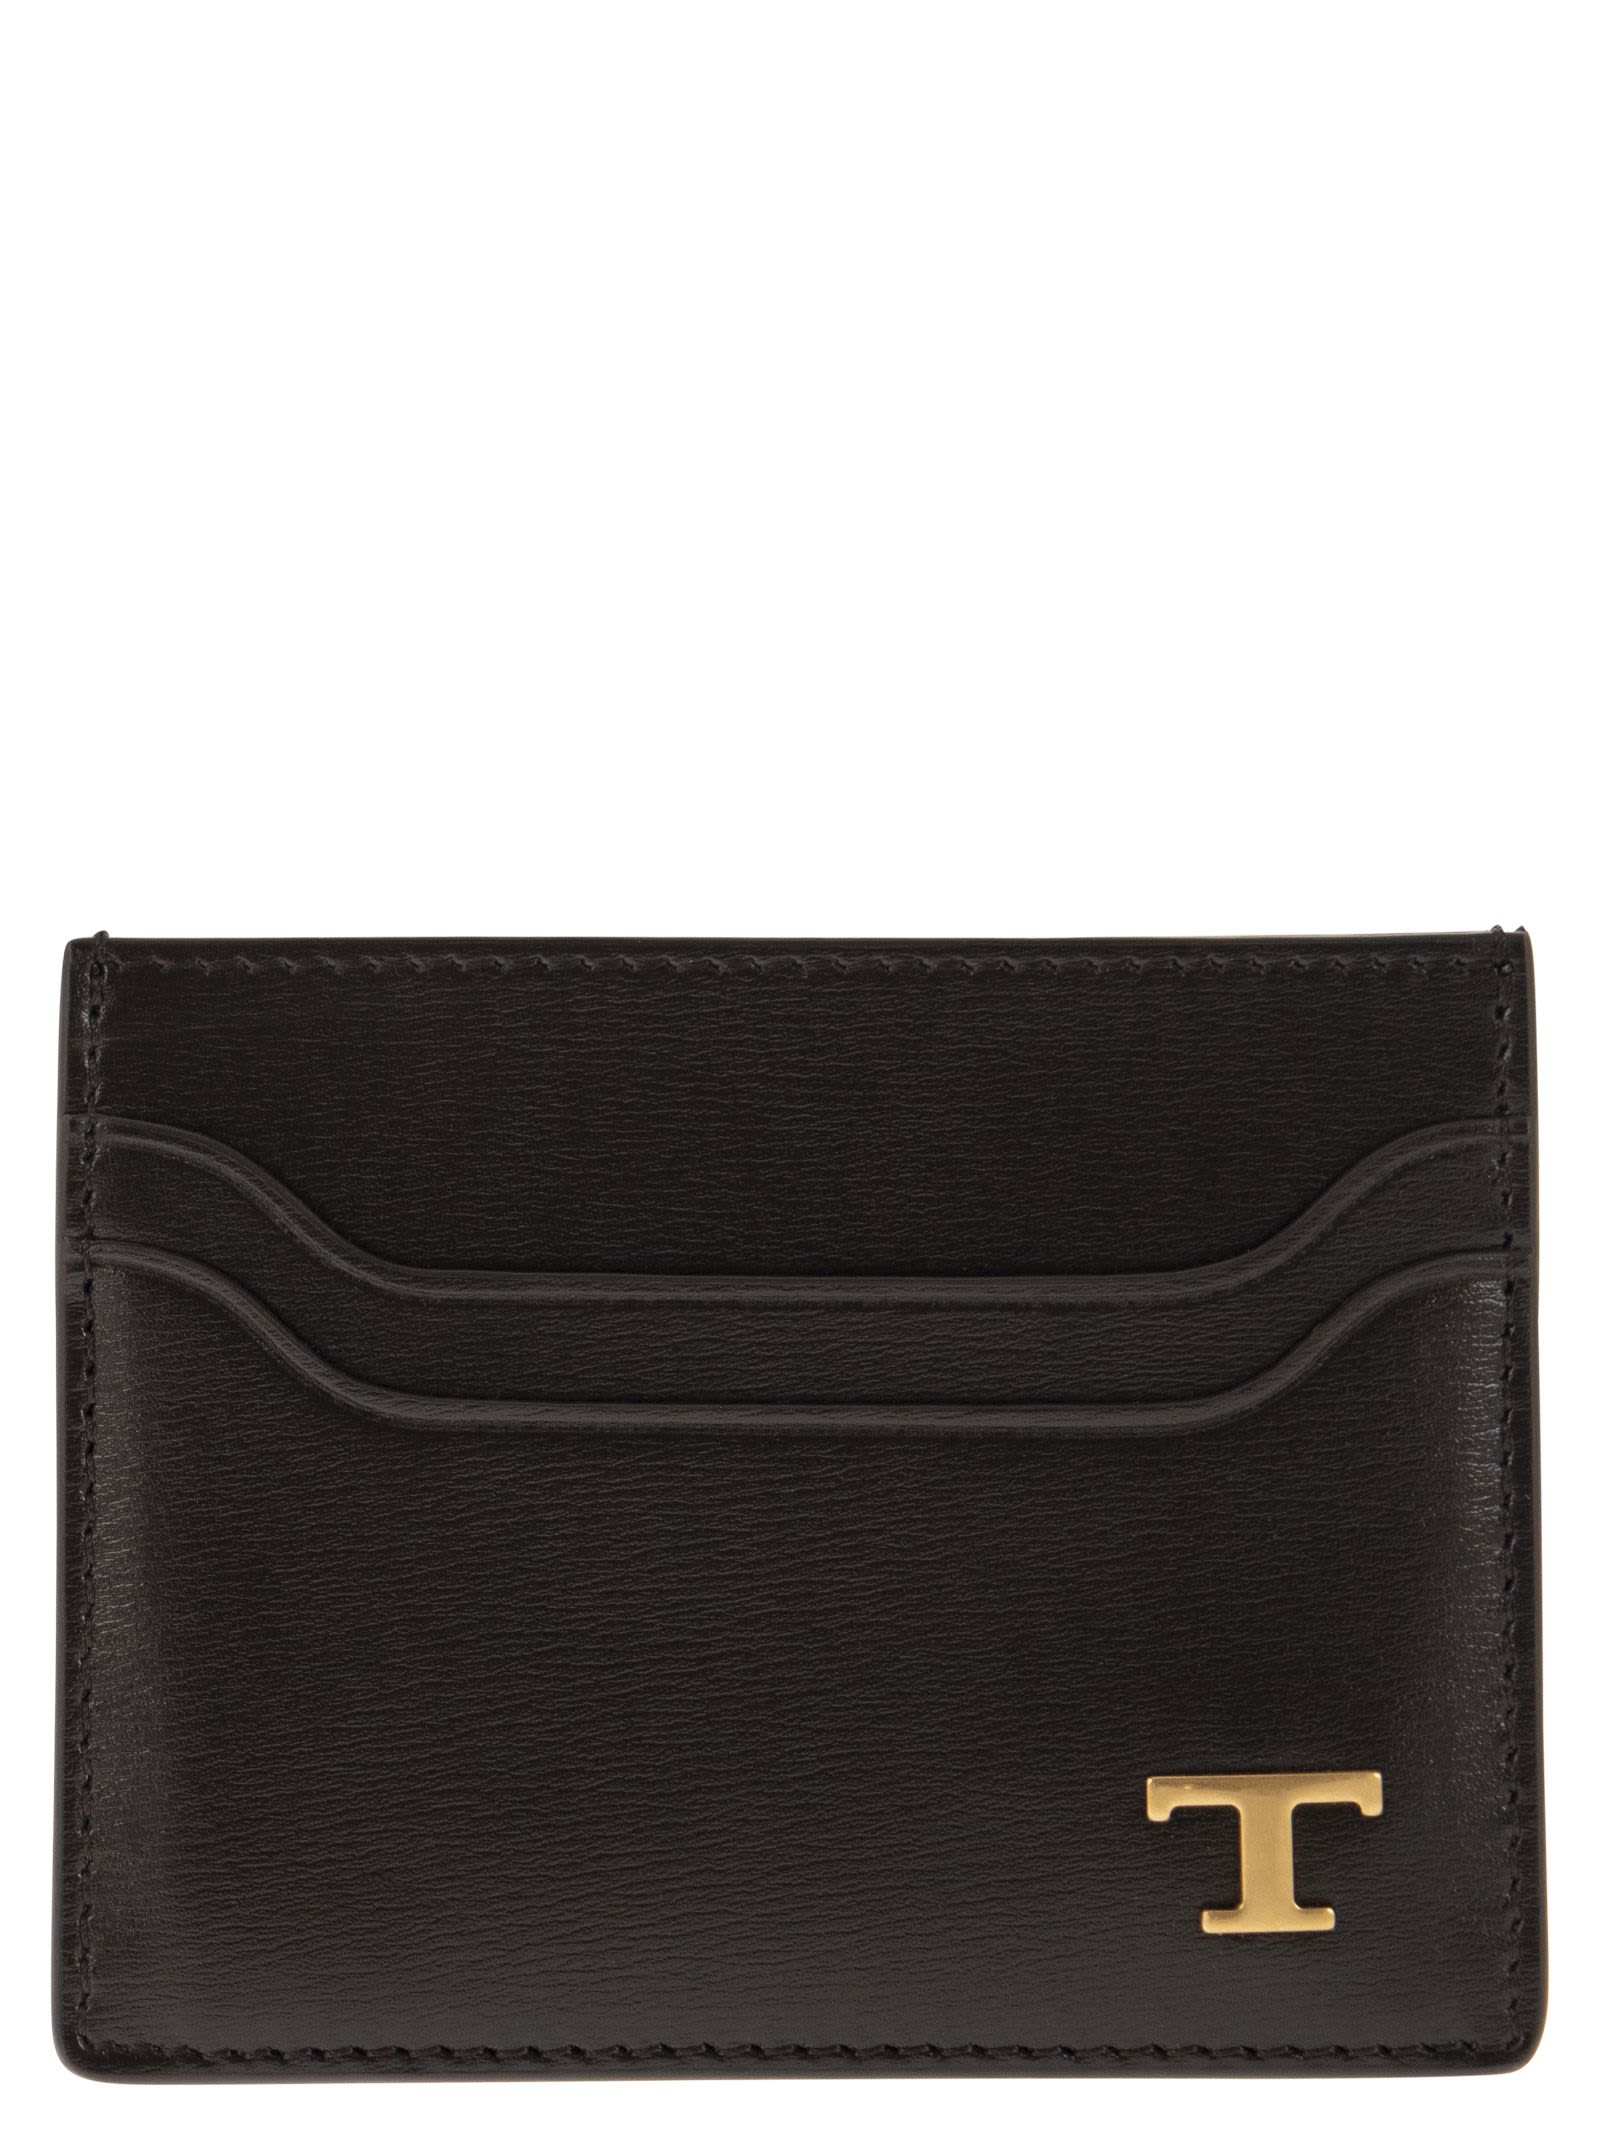 TOD'S LEATHER CARD HOLDER WITH LOGO